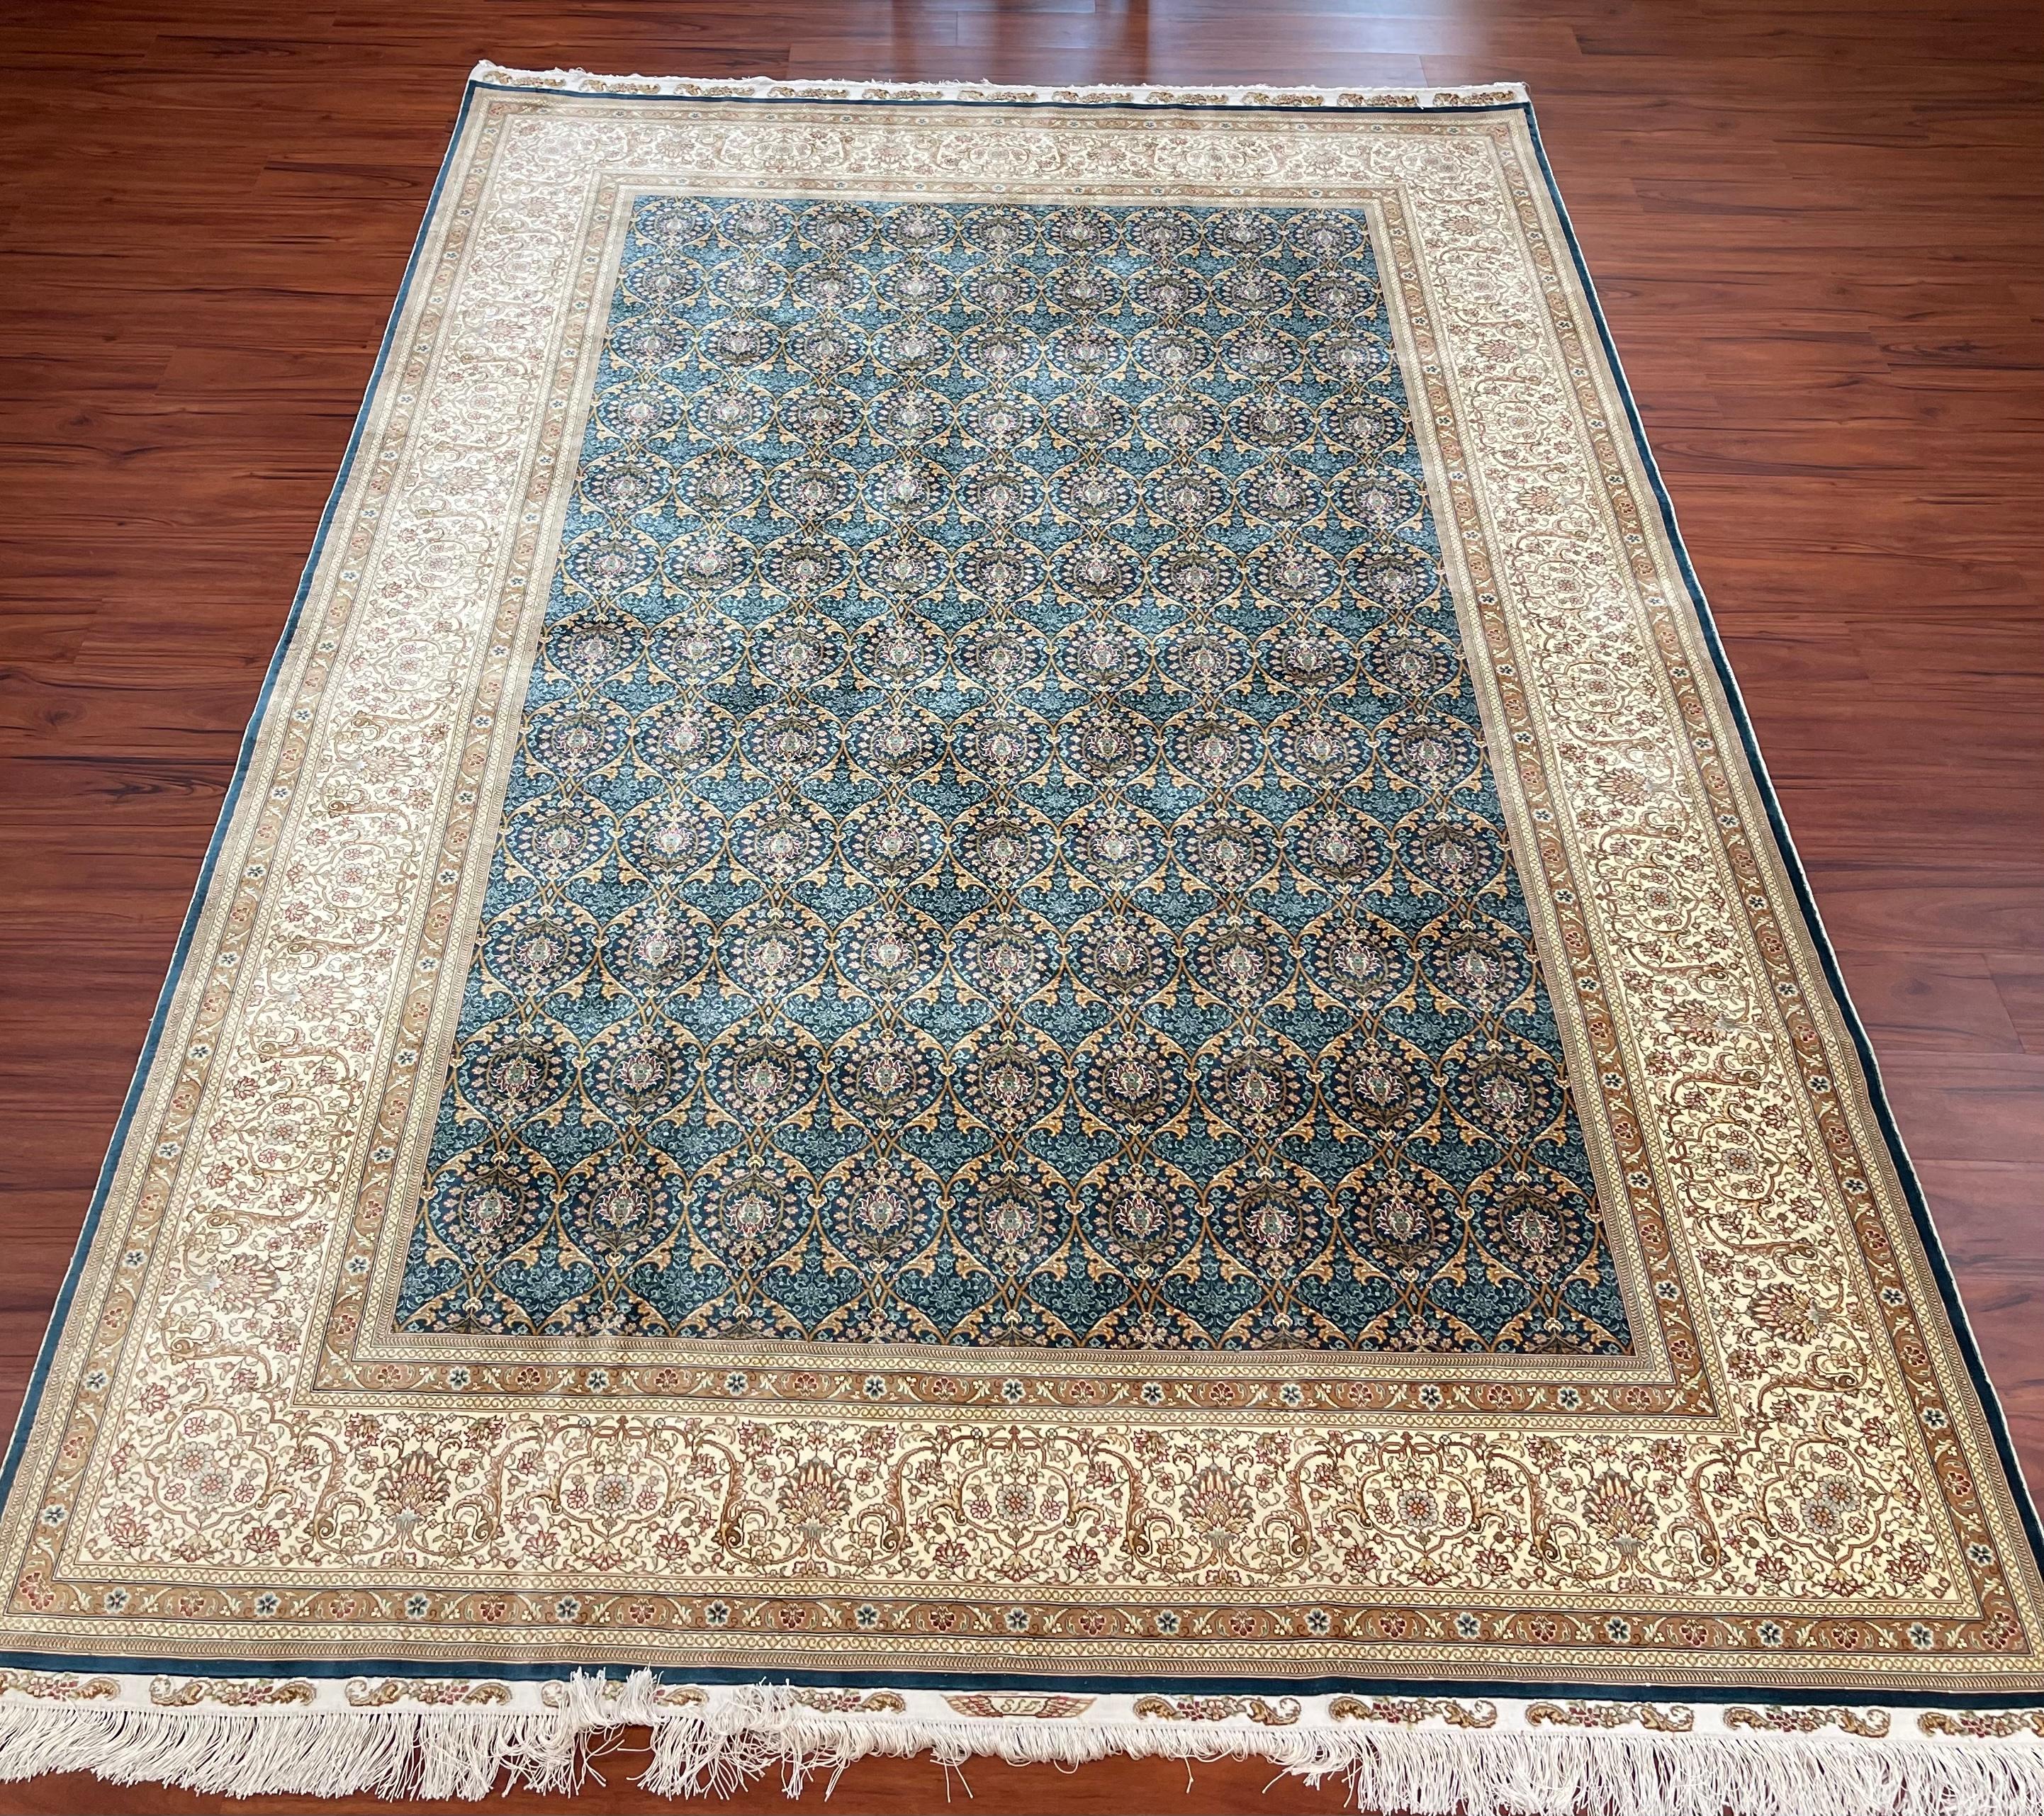 This is a beautiful 100% silk Sino Tabriz Rug/Carpet originated from China in the early 2000s. This hand-knotted rug is in brand new condition and is absolutely stunning.